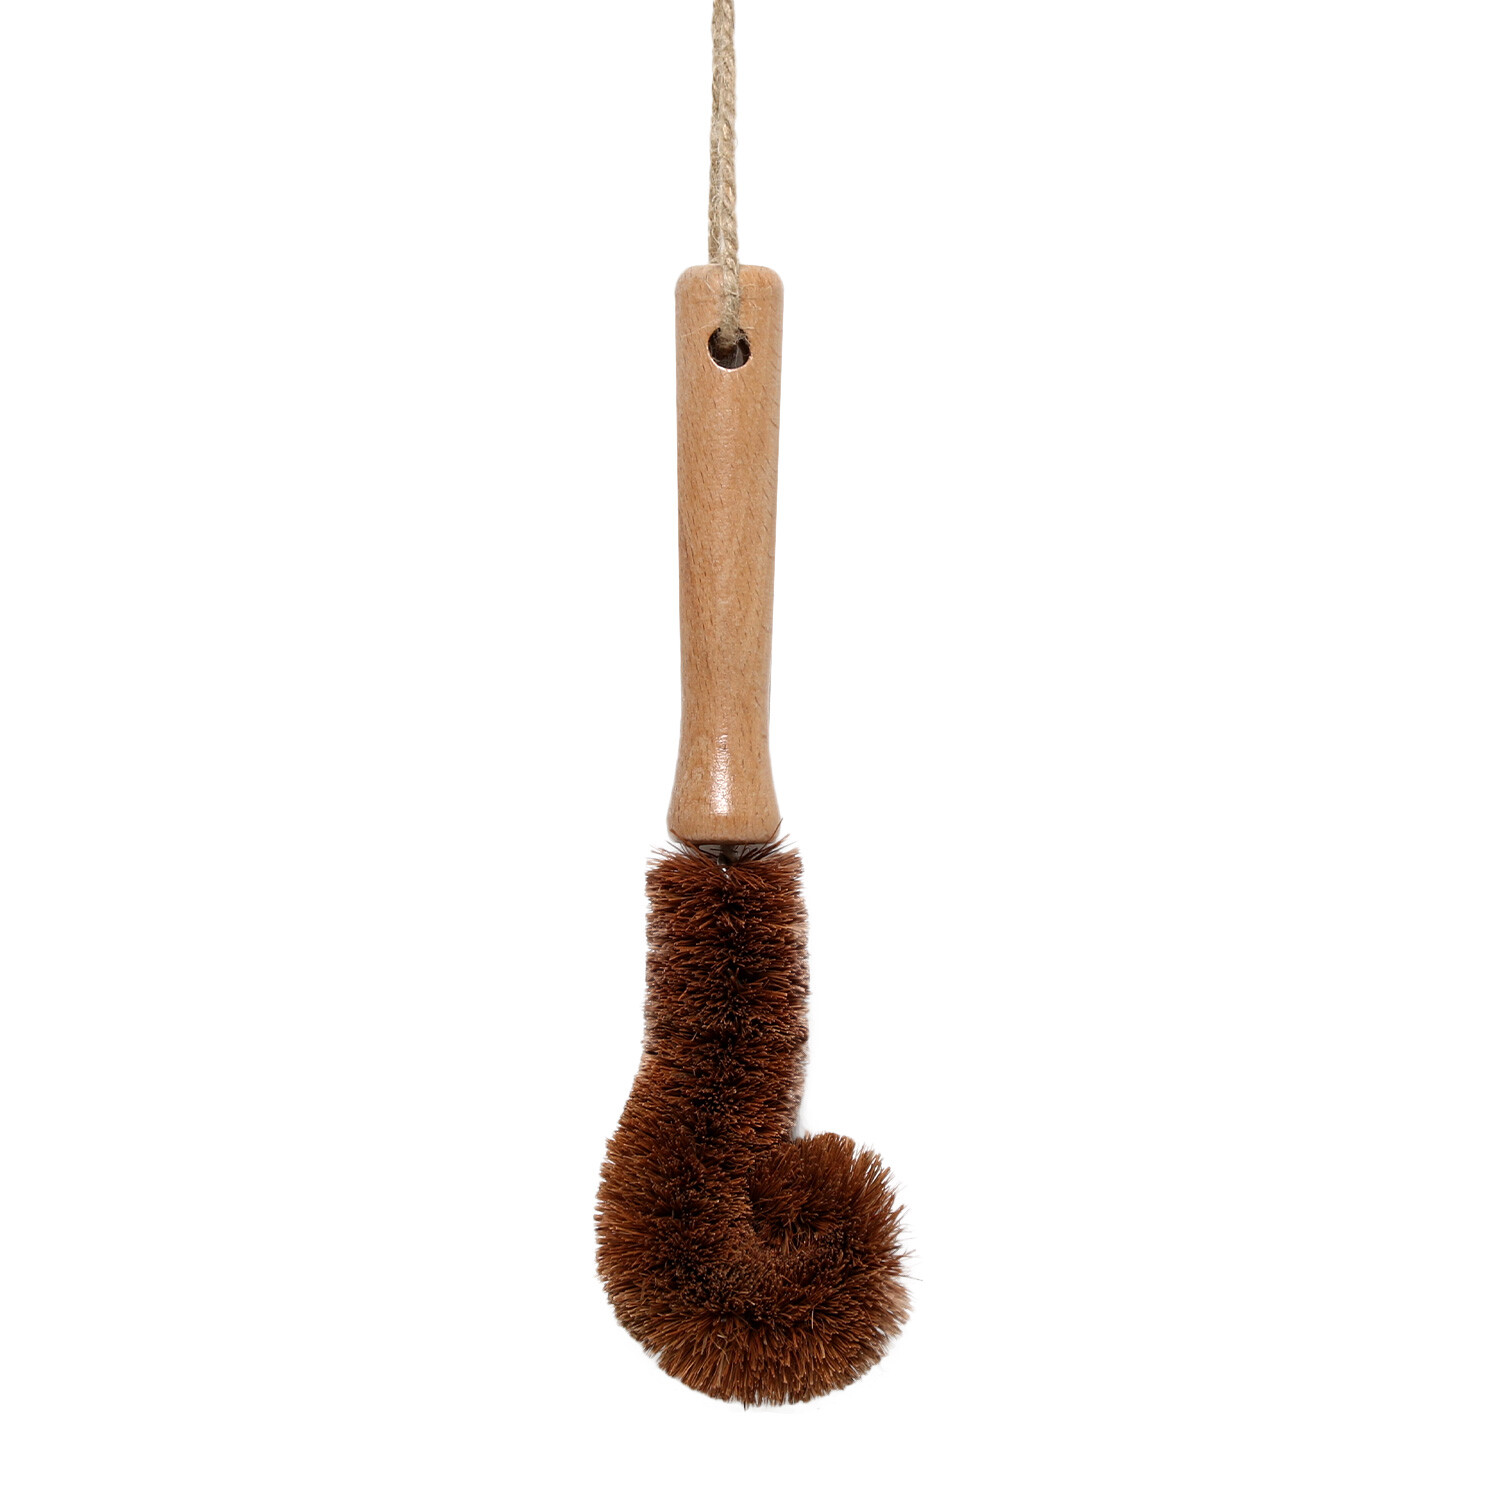 Coconut Pot Brush with Wooden Handle Image